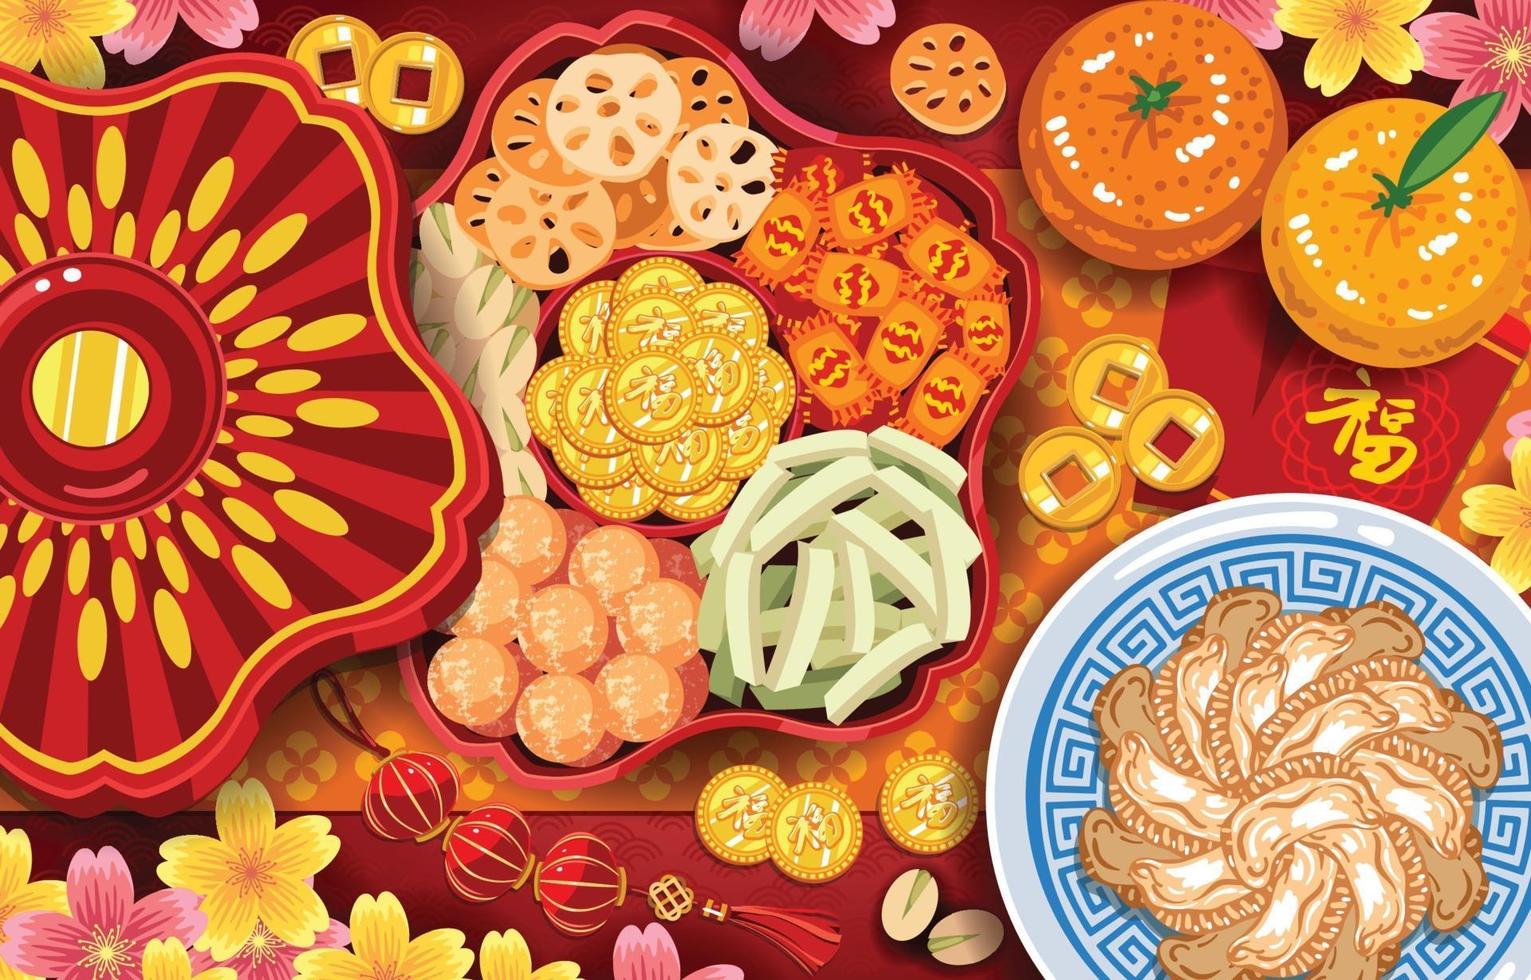 Chinese New Year Staple Foods and Delicacies Concept vector